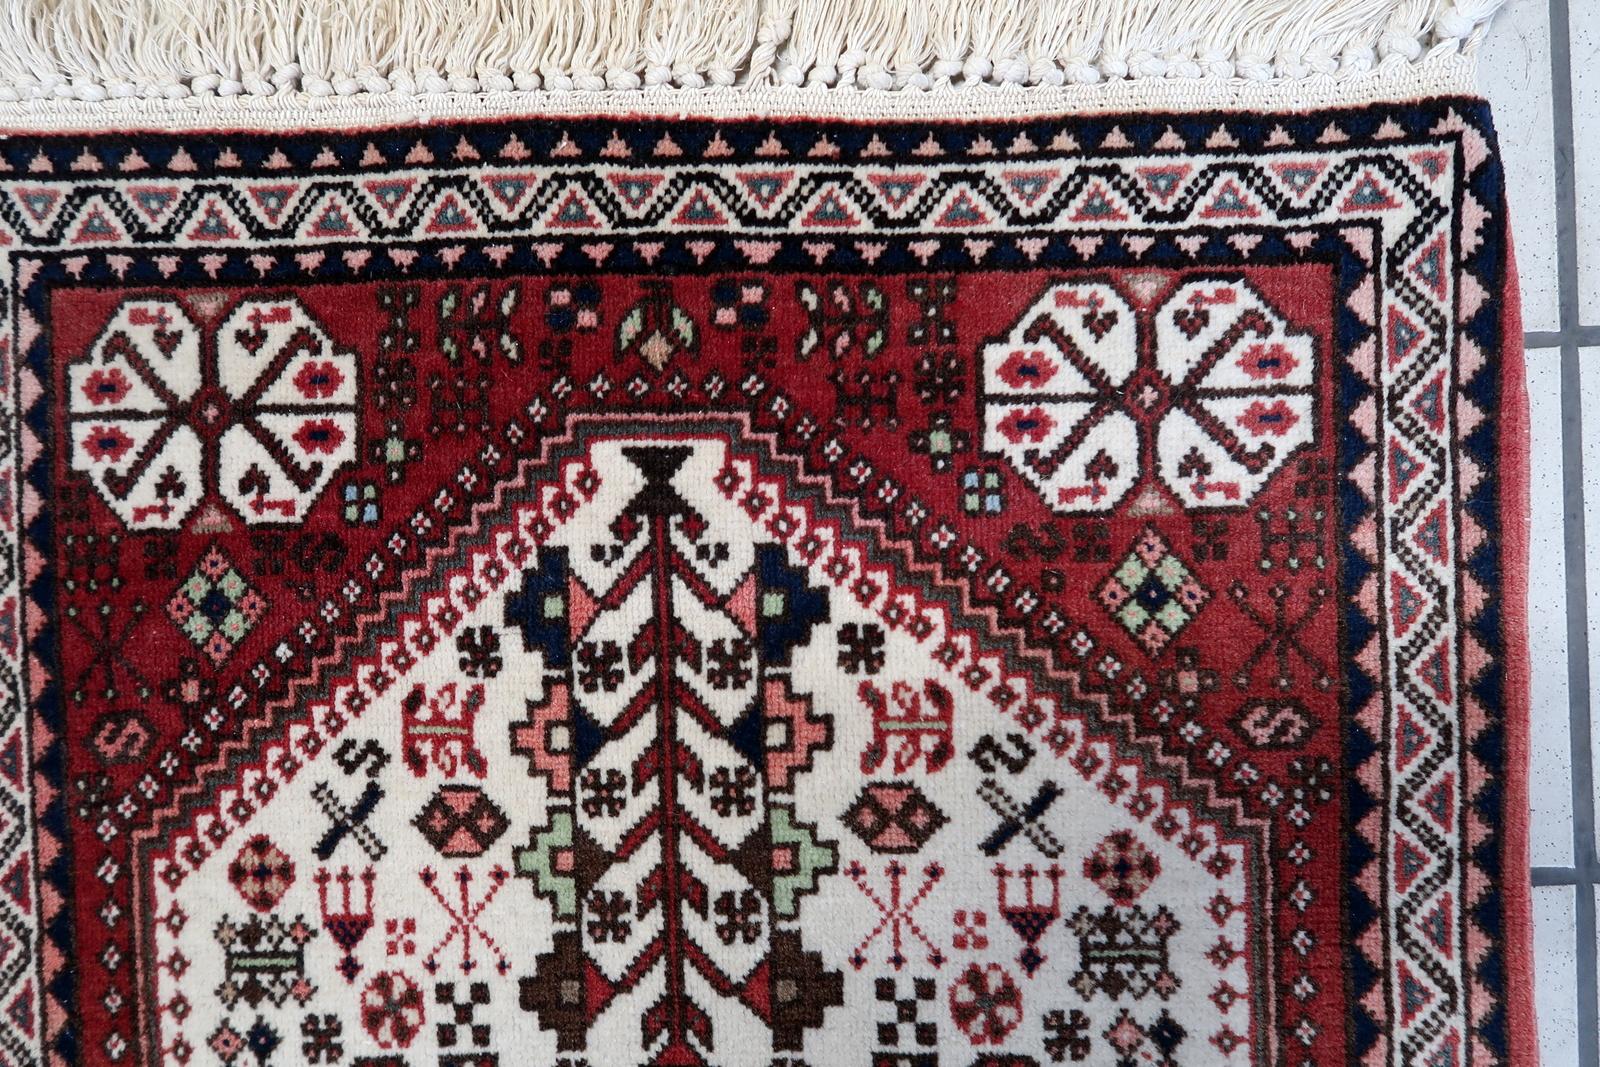 Handmade Vintage Persian Style Gashkai Rug:

Design and Colors:
This rectangular rug features intricate woven designs that echo the rich heritage of Persian craftsmanship.
The dominant colors include:
Deep Reds: These warm tones evoke a sense of